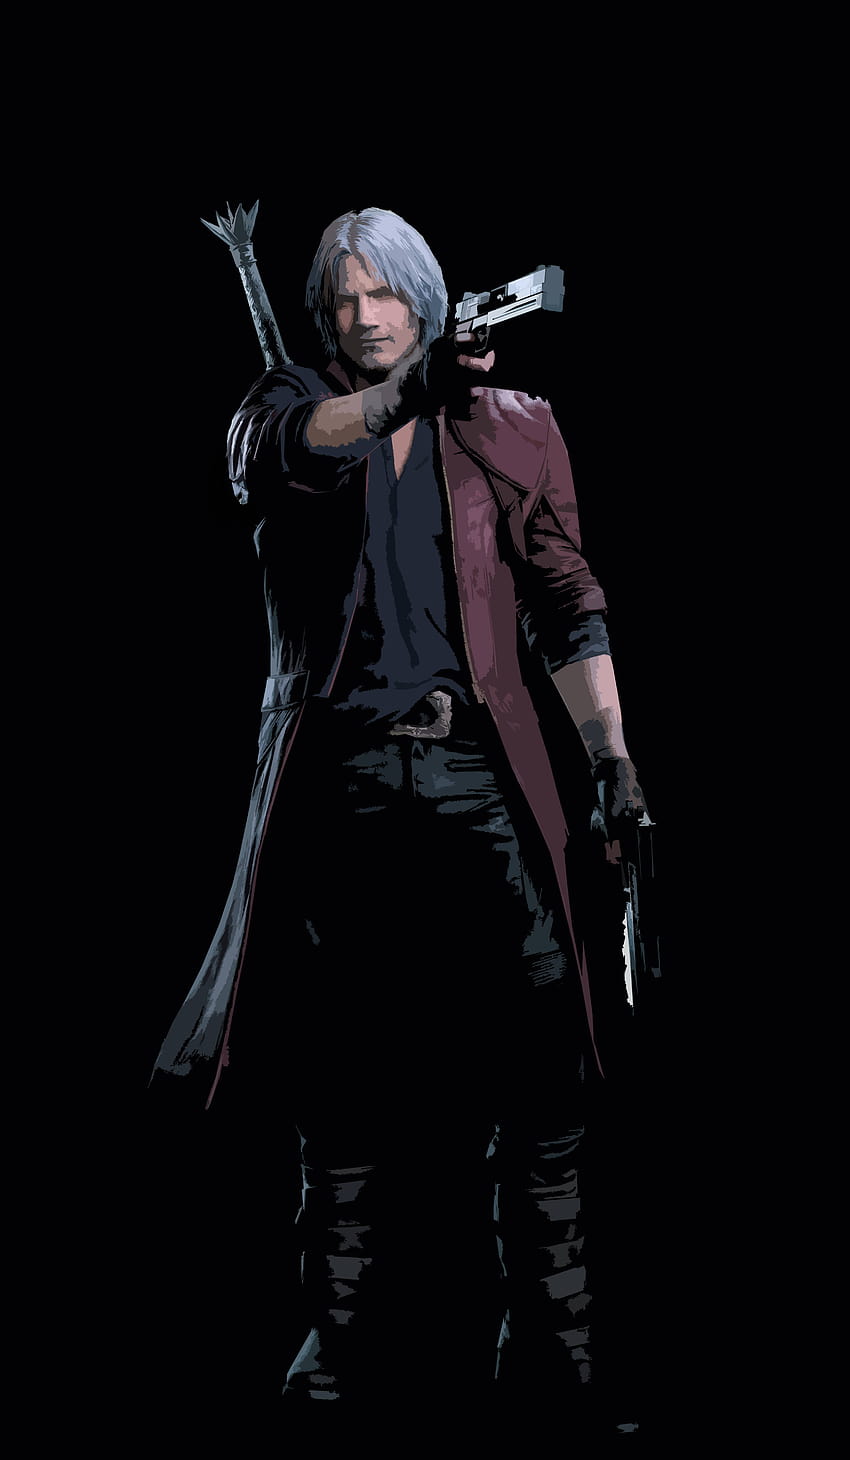 Dante Simple Super Amoled Phone Backgrounds : DevilMayCry, creative ...